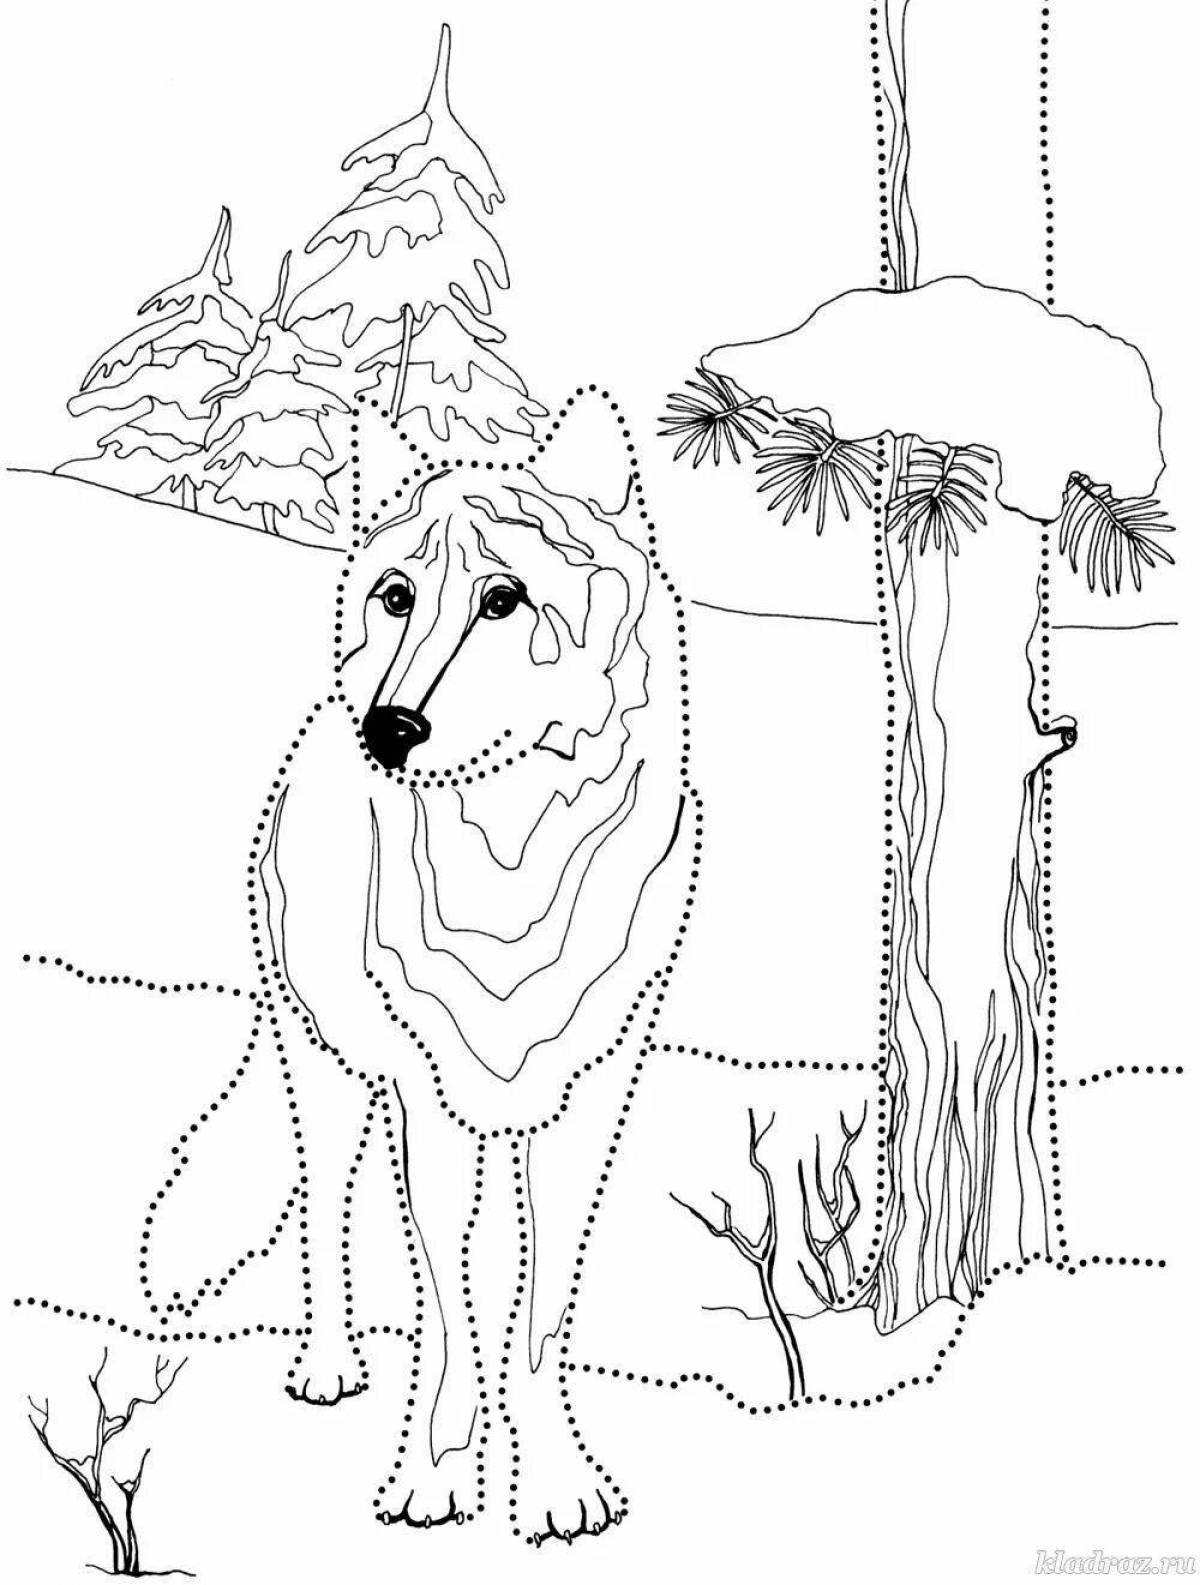 Colourful winter animals coloring pages for kids